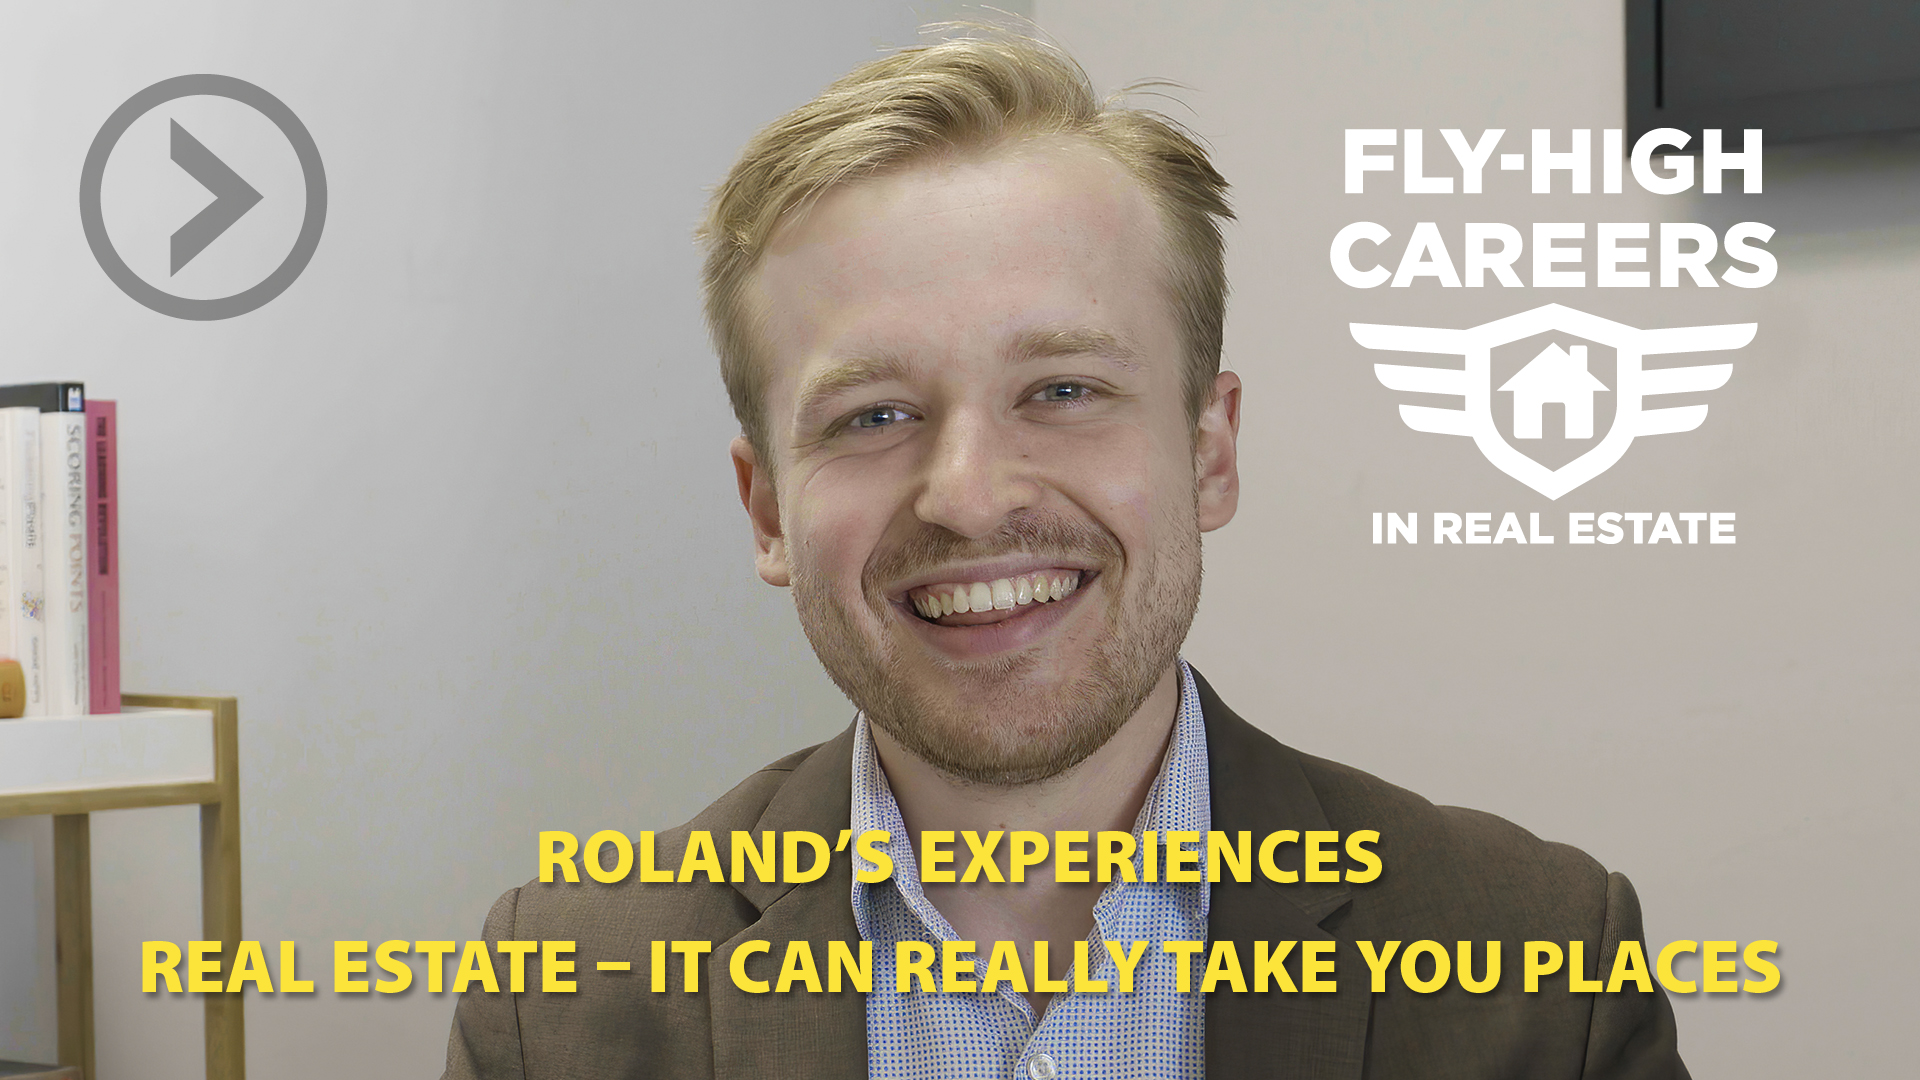 Roland's experiences in real estate - it can really take you places.